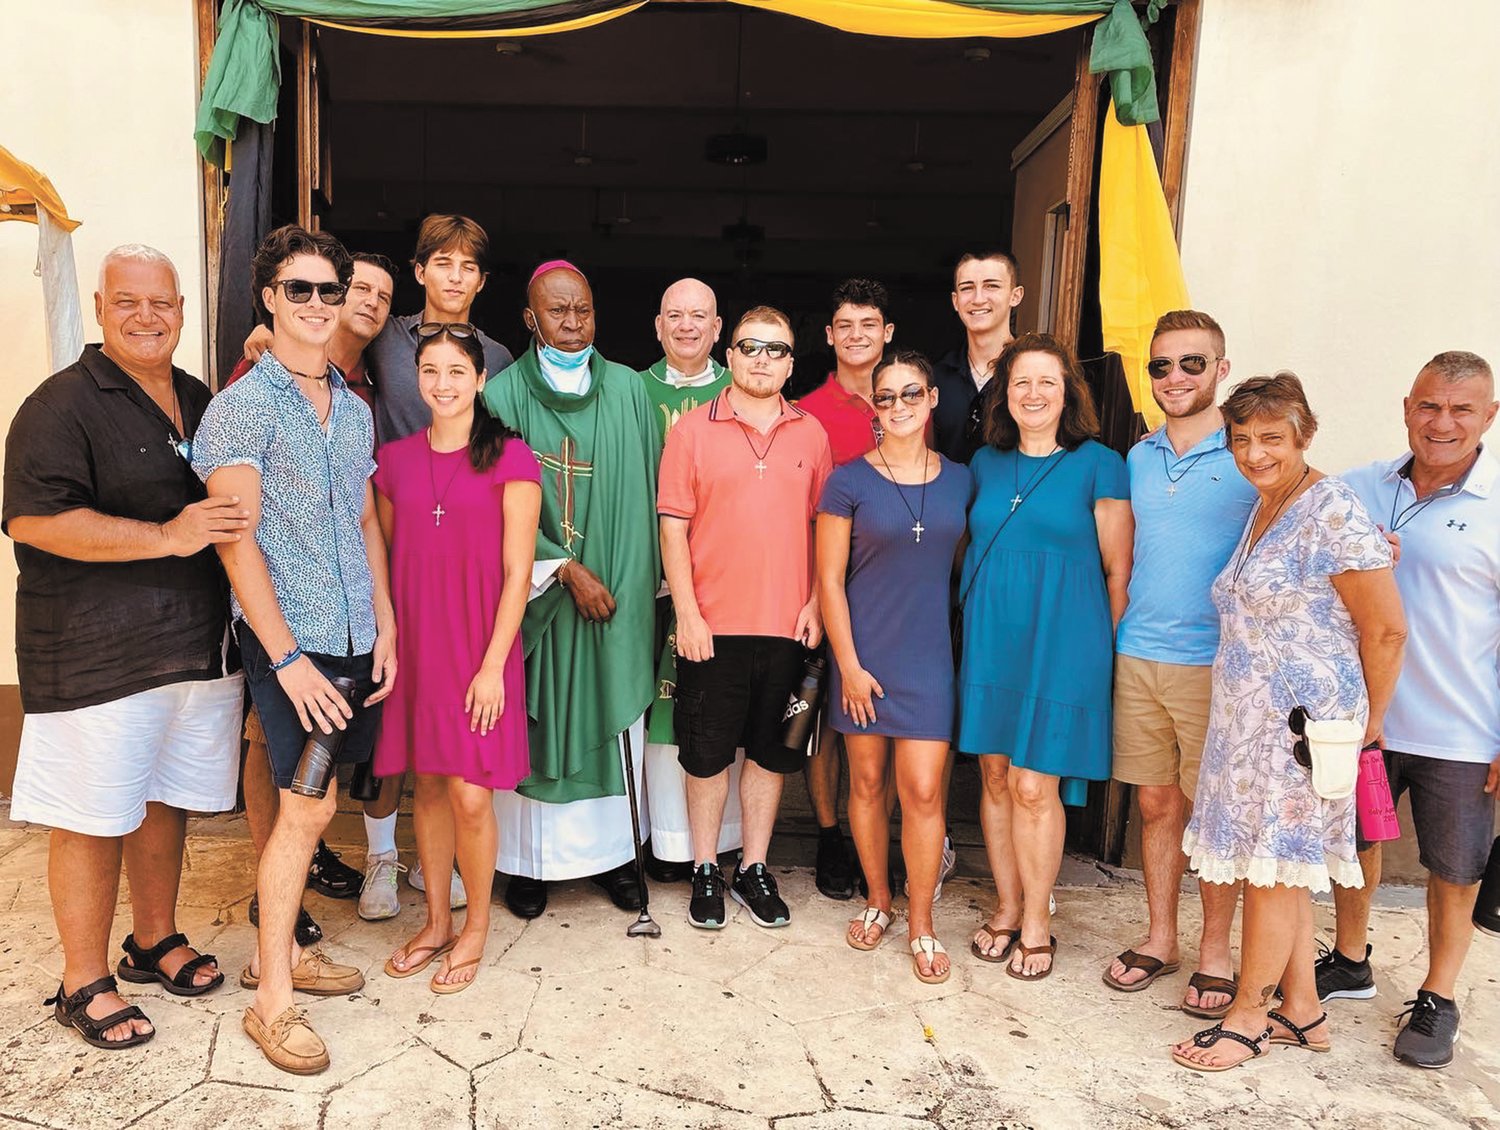 A WARM WELCOME: Holy Apostles Church’s missionaries attended mass where Bishop Burchell McPherson, Bishop of the Dioceses of Montego Bay, welcomed the group multiple times during the mass. (Submitted photo)